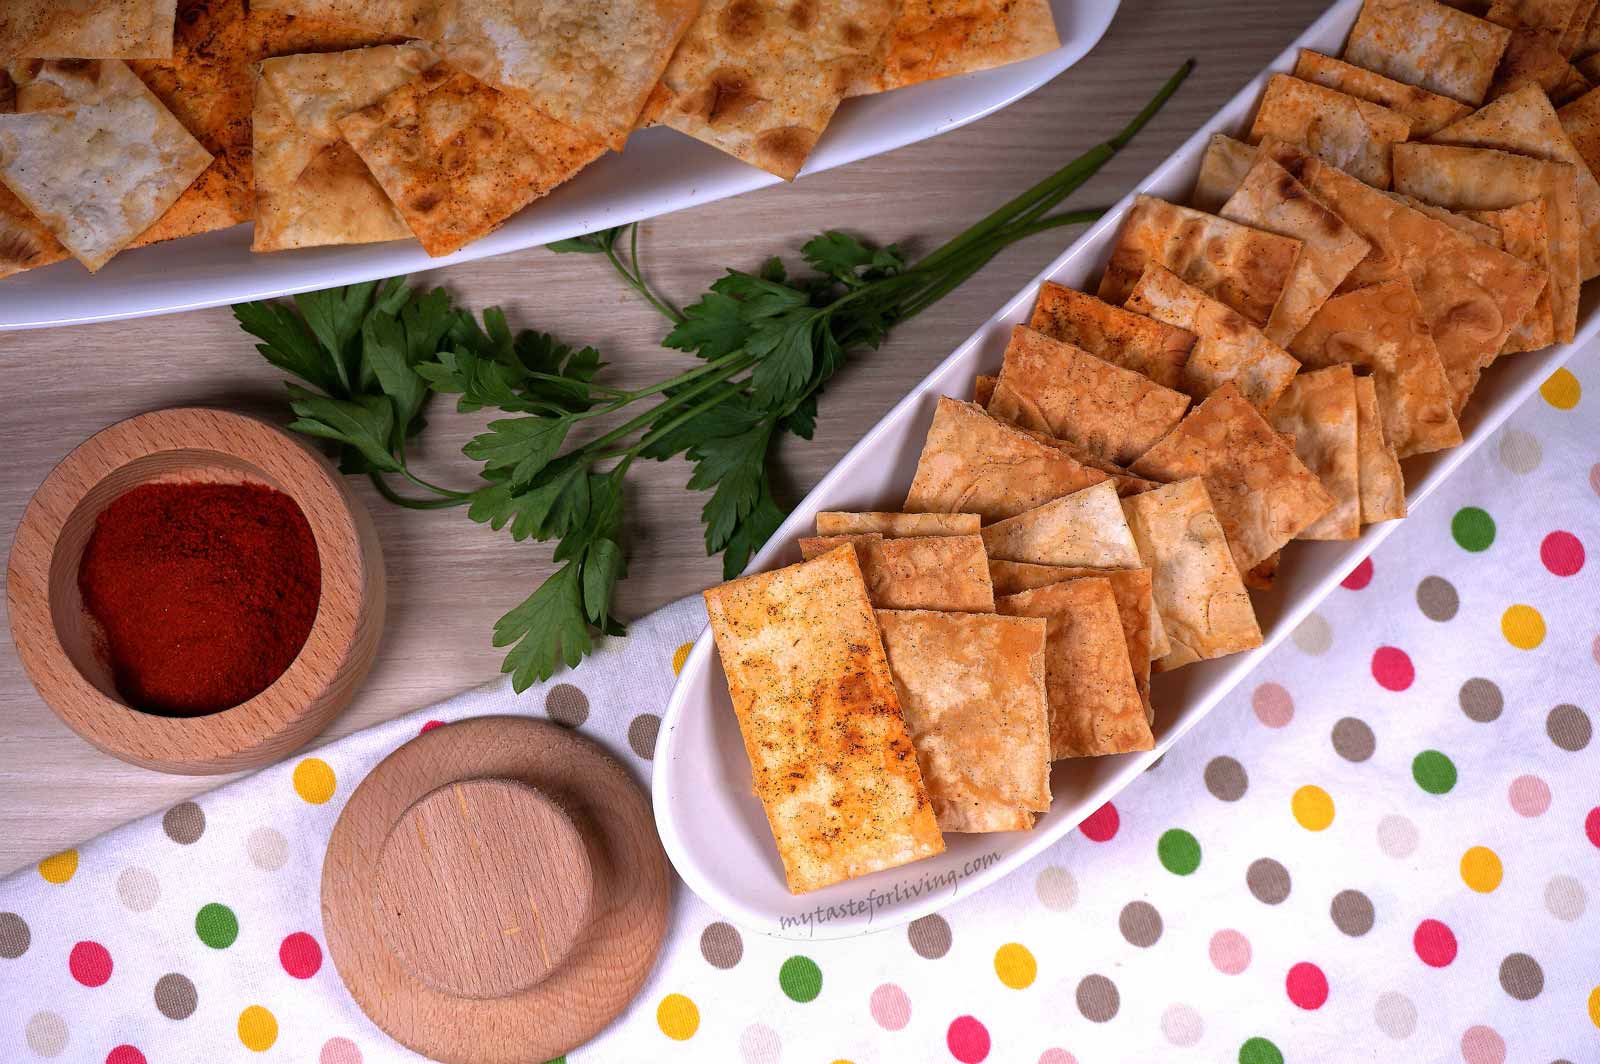 Homemade crispy lavash chips have been a hit at home lately. It is prepared easily and quickly. You can prepare it with different spices to taste. Our favourite is paprika. Try it! It's easy. It's fast. It's delicious. I hope you find out what your taste is and share!